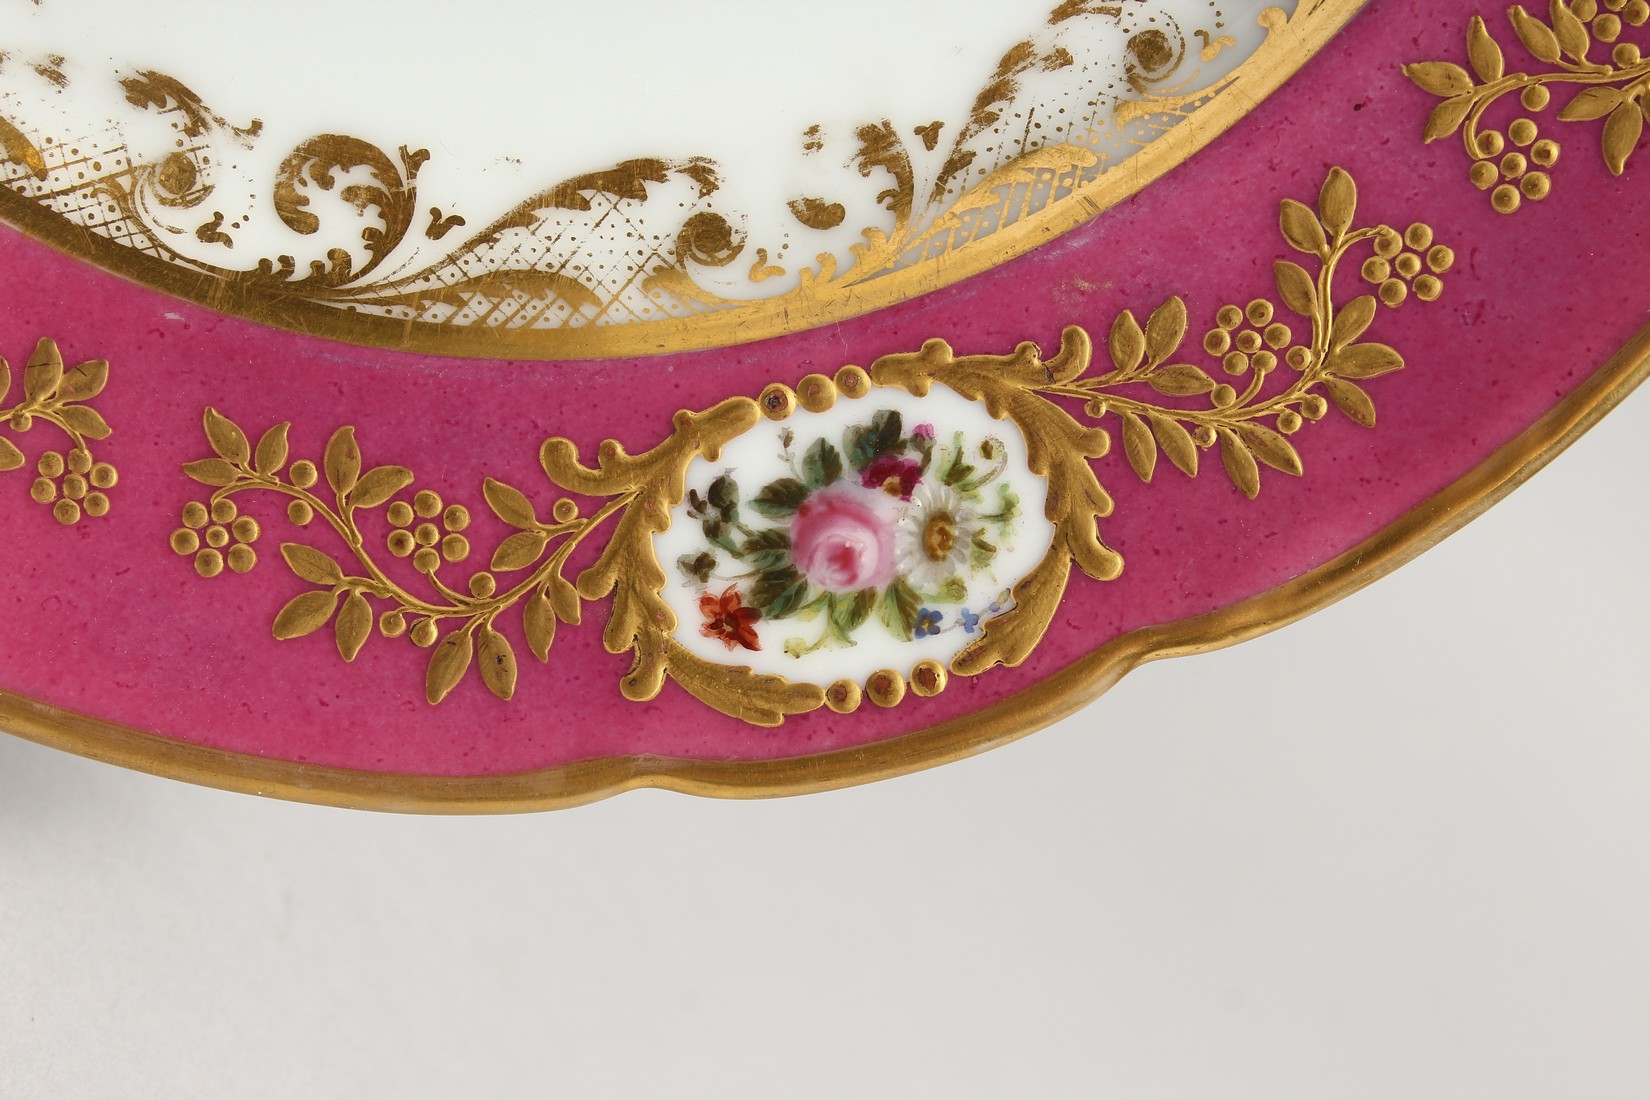 A 19TH CENTURY FRENCH DENVELLE PORCELAIN PLATE with rose coloured border, vignettes of flowers, gilt - Image 5 of 11